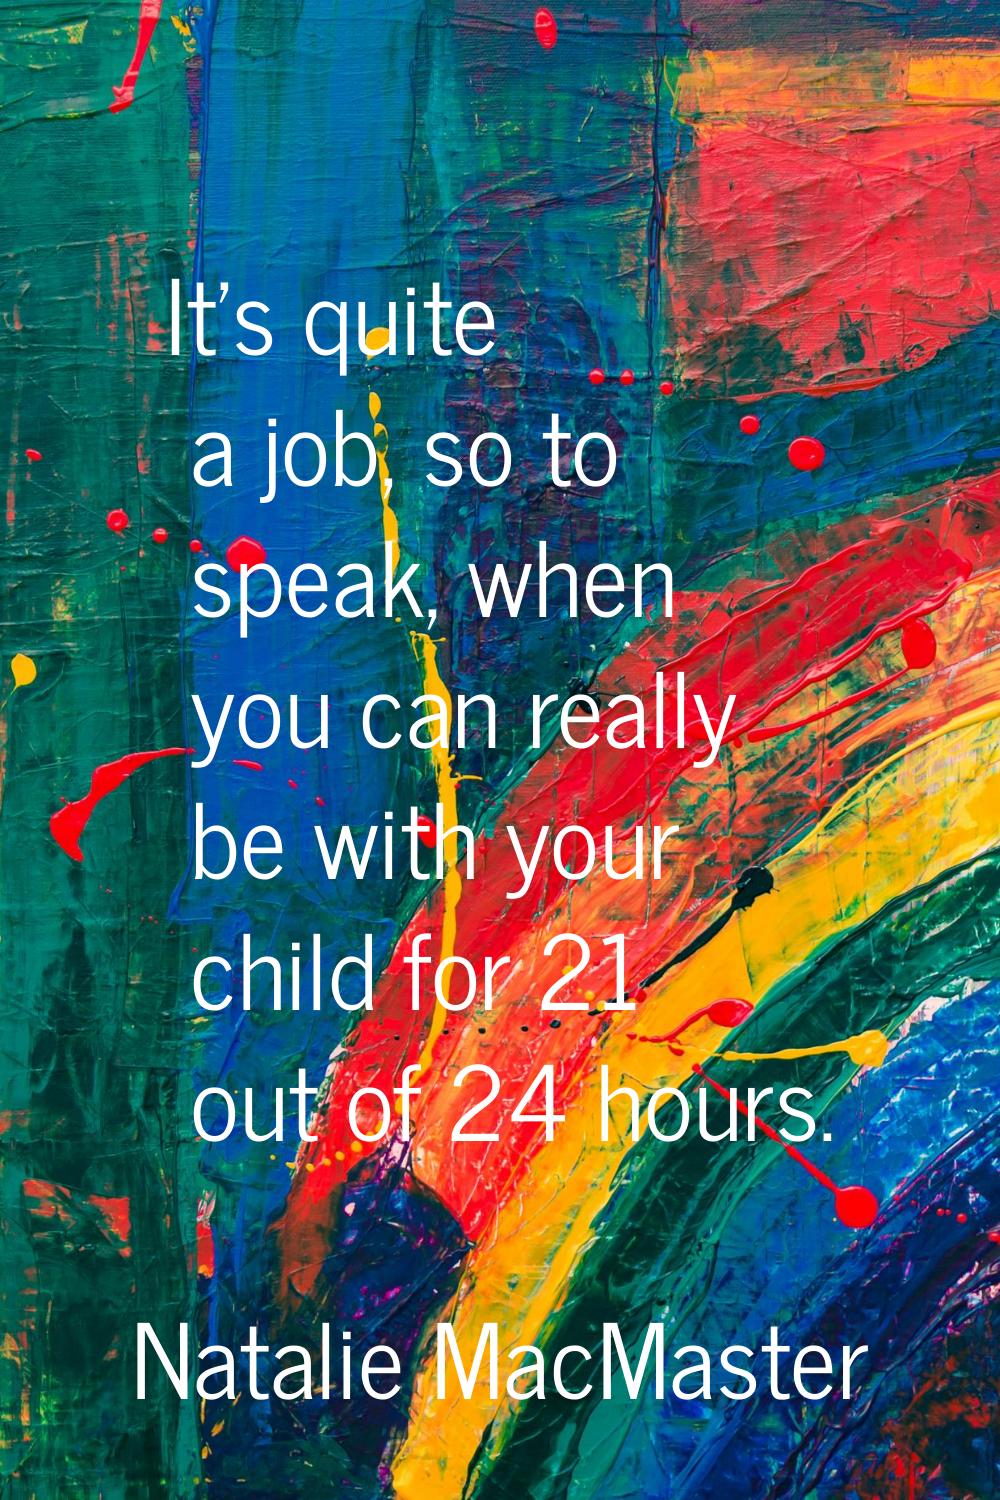 It's quite a job, so to speak, when you can really be with your child for 21 out of 24 hours.